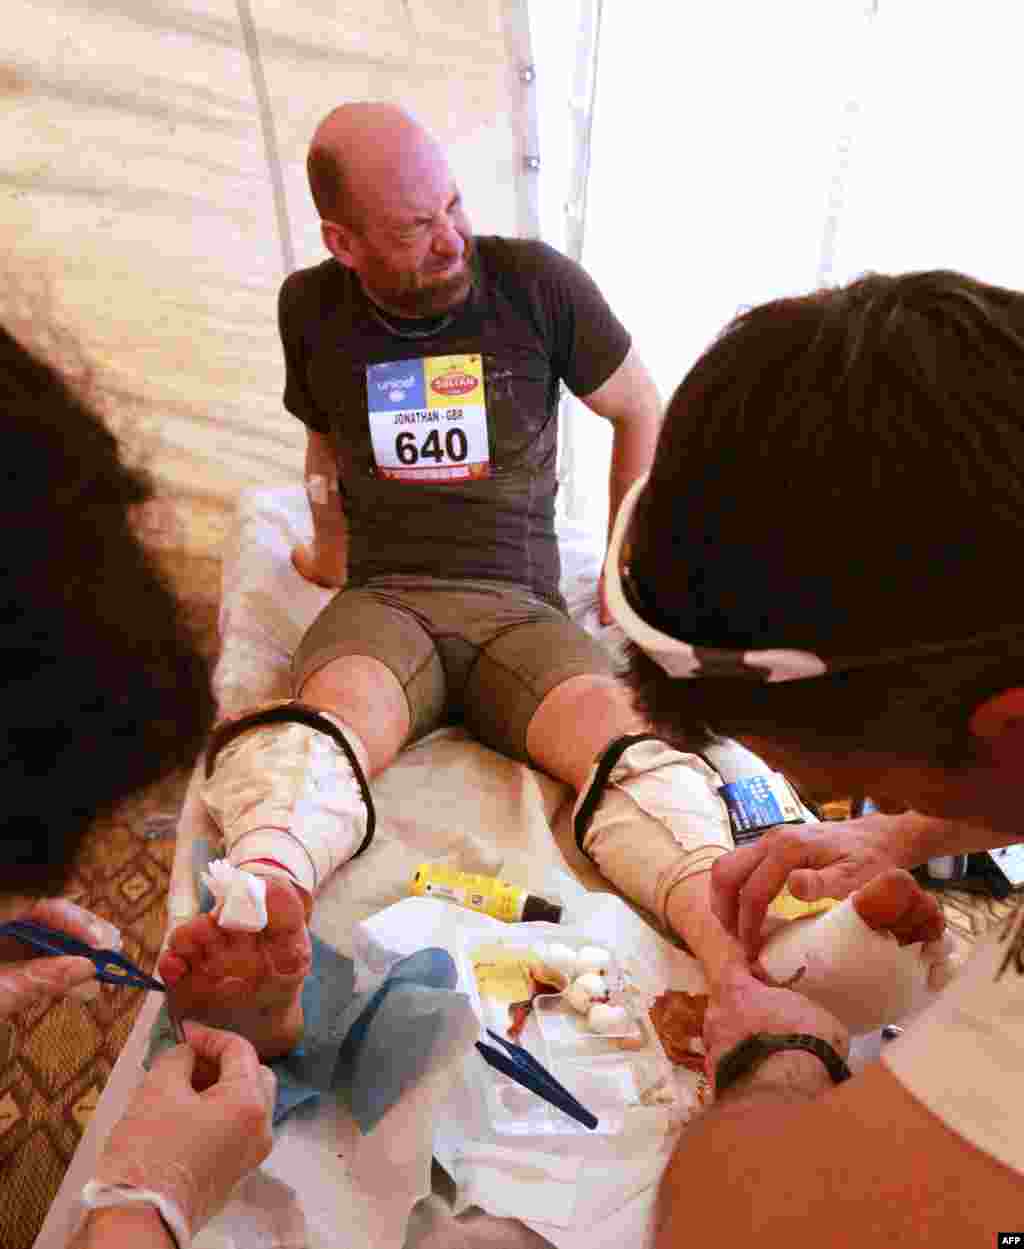 A competitor receives treatement on his feet during the 28th edition of the grueling 224-kilometer Marathon des Sables in Morocco. Competitors must carry all of their equipment on their backs during the seven-day race. Only carefully rationed bottles of water and open-sided local tents are provided by the organizers. (AFP/Pierre Verdy)